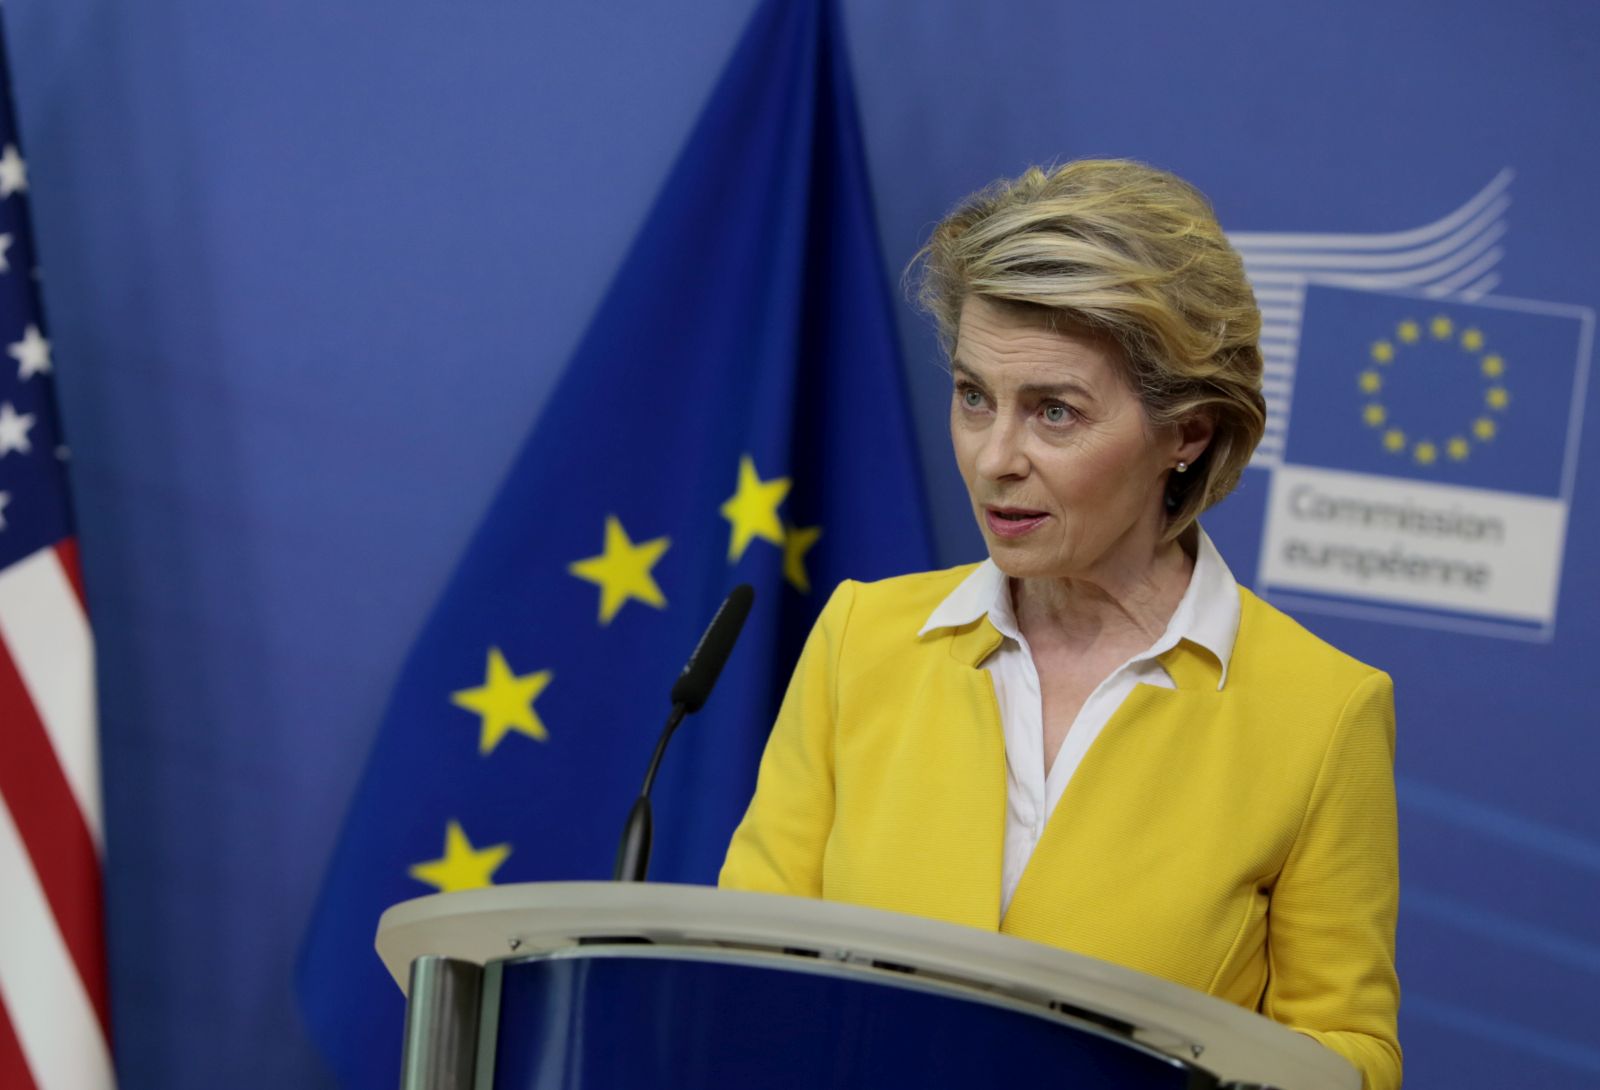 epa09094054 European Commission President Ursula von der Leyen addresses a media conference with US Secretary of State Antony Blinken (not pictured) at EU headquarters in Brussels, Belgium, 24 March 2021.  EPA/VIRGINIA MAYO / POOL